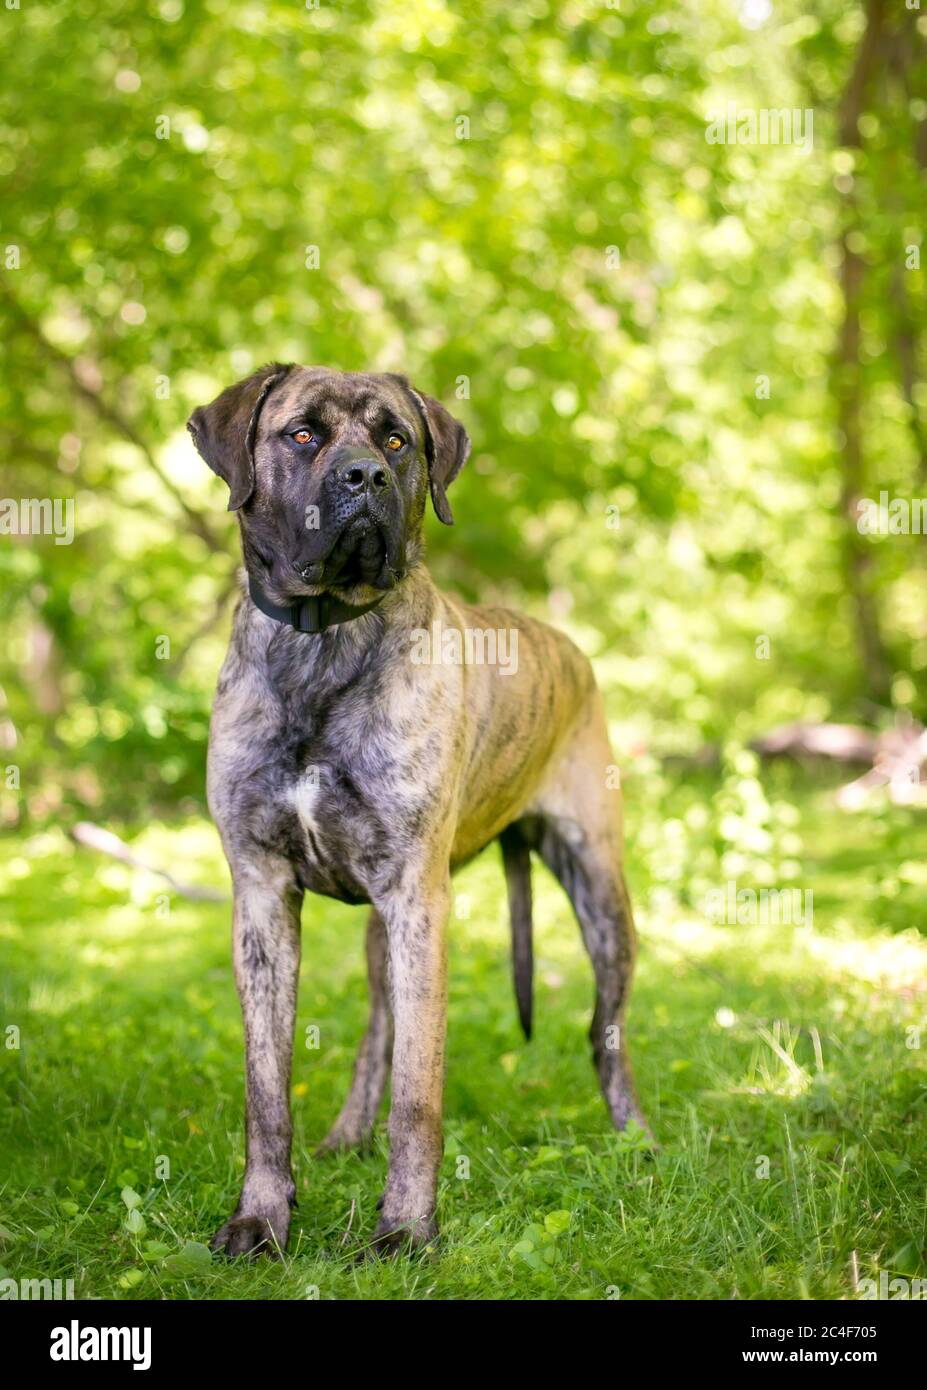 A brindle Cane Corso Italian Mastiff dog standing outdoors and looking into the distance Stock Photo